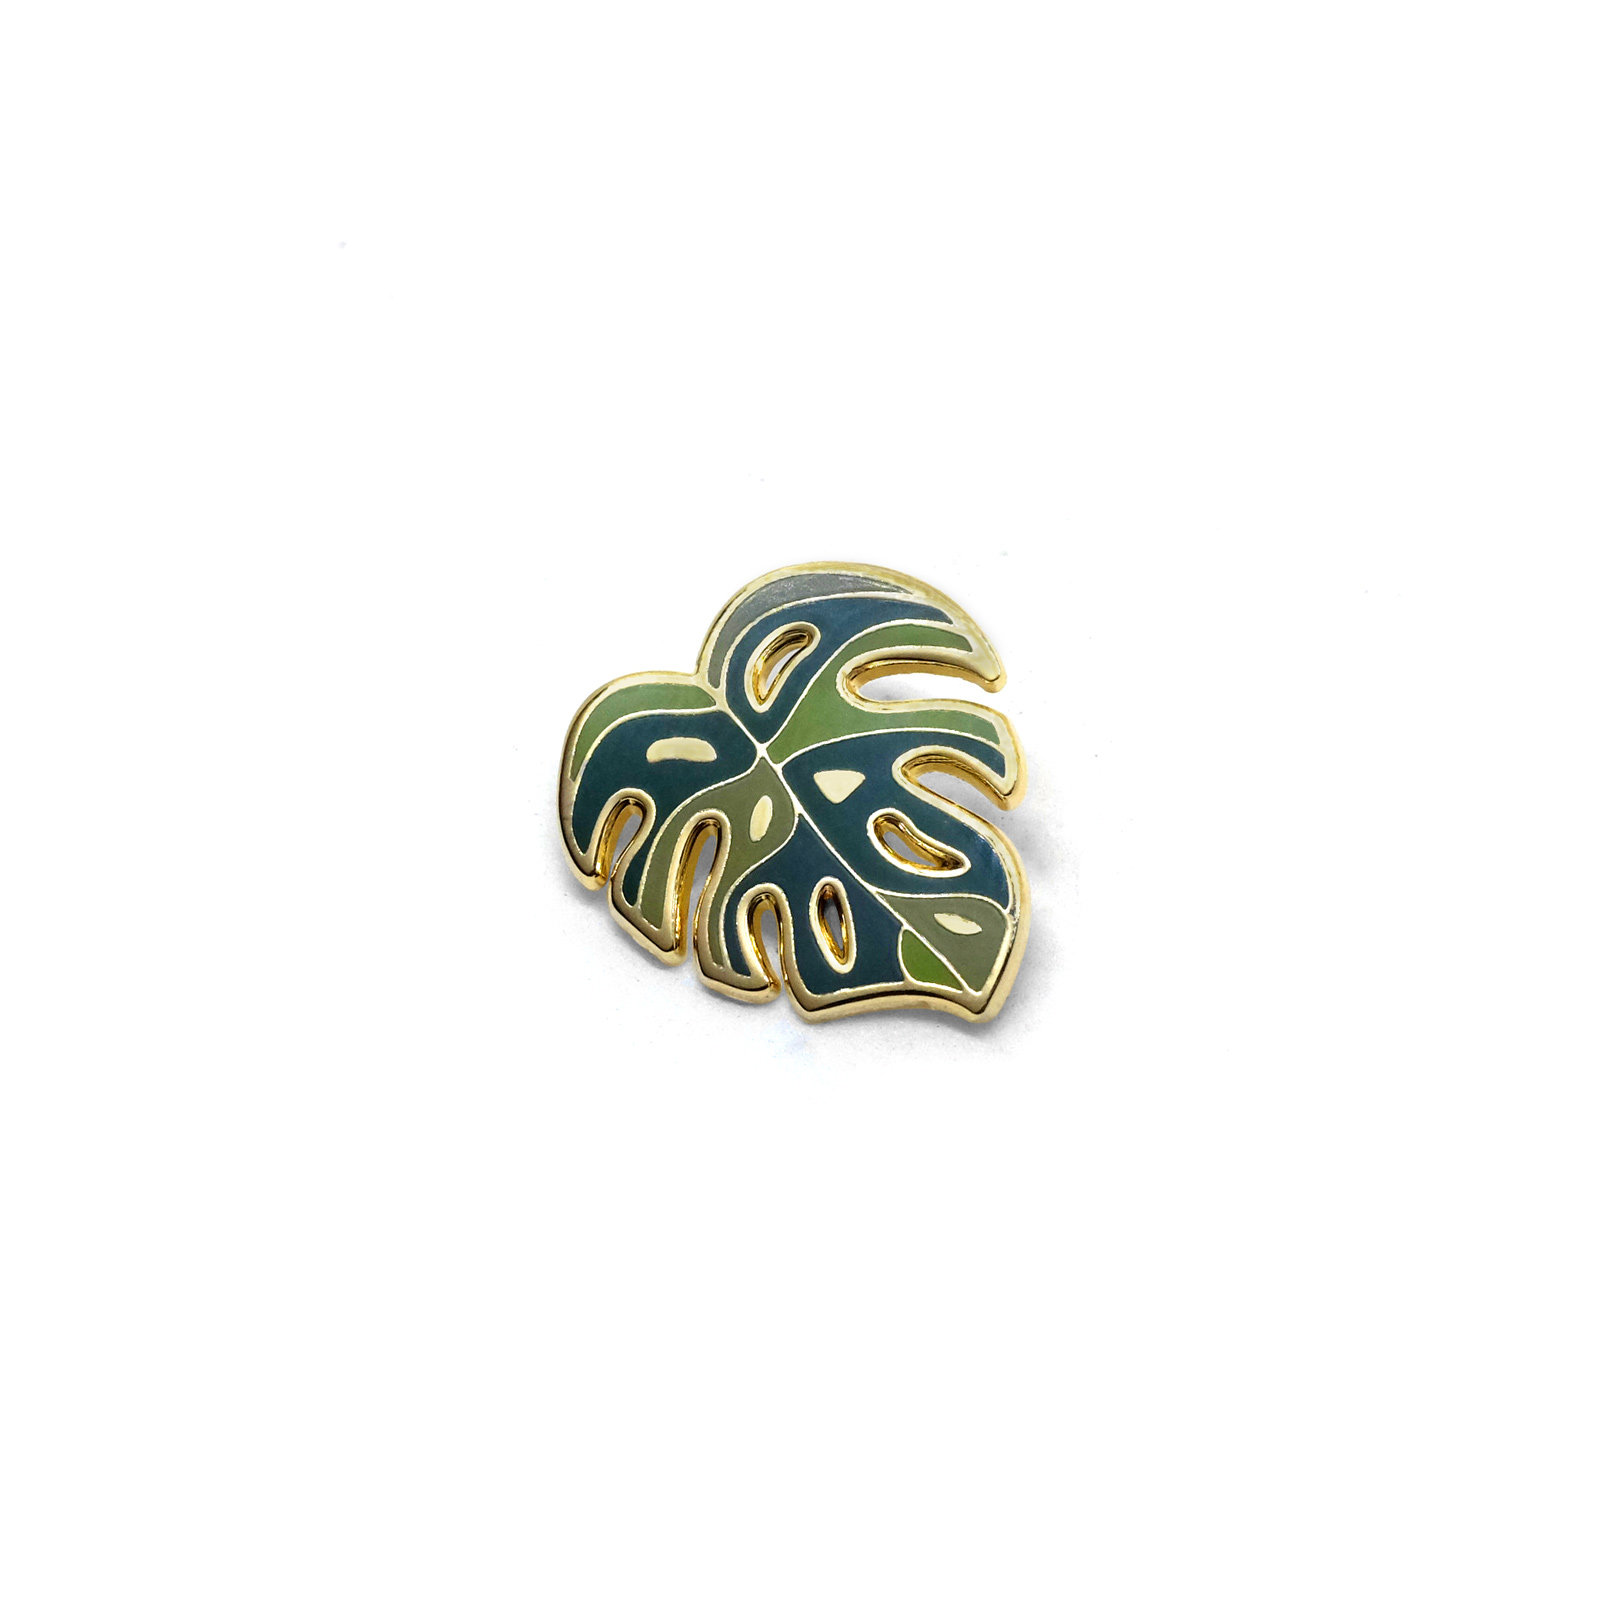 Shop: Synthesis Monstera Deliciosa Pin — Lost Lust Supply